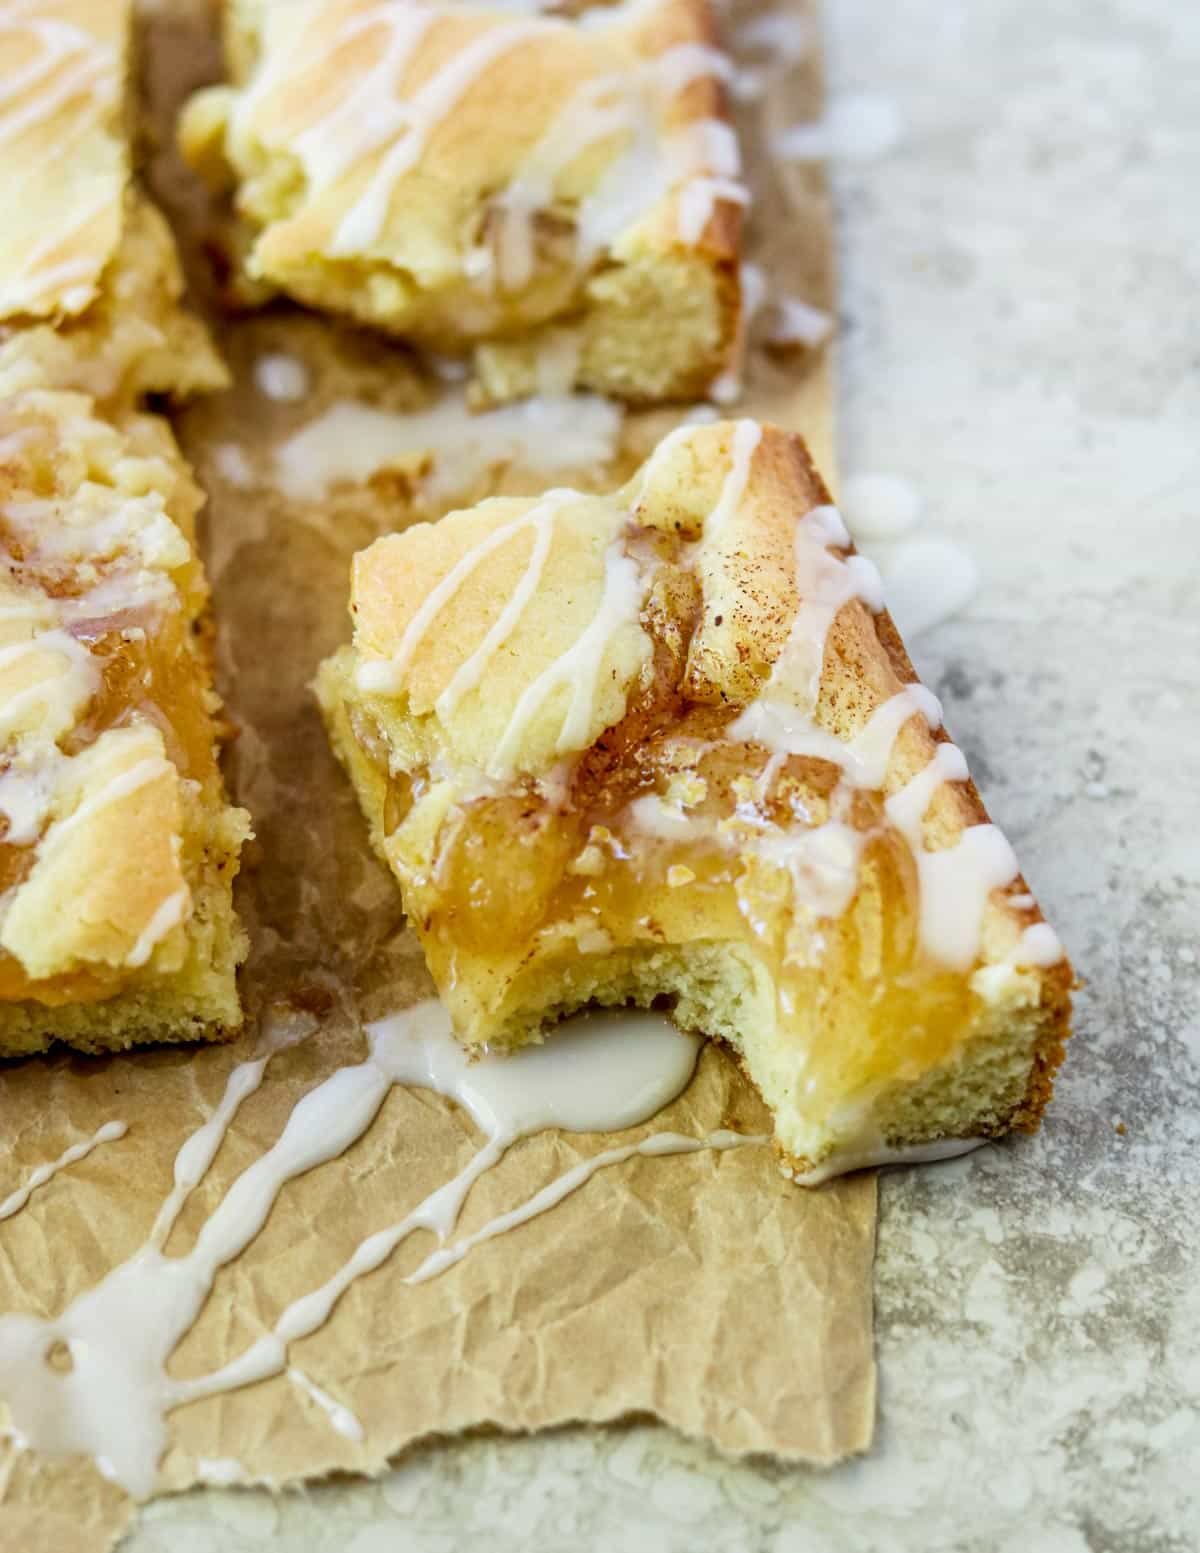 Apple Pie Bars cut into rectangles and placed on a sheet of parchment paper, drizzled with powder sugar glaze